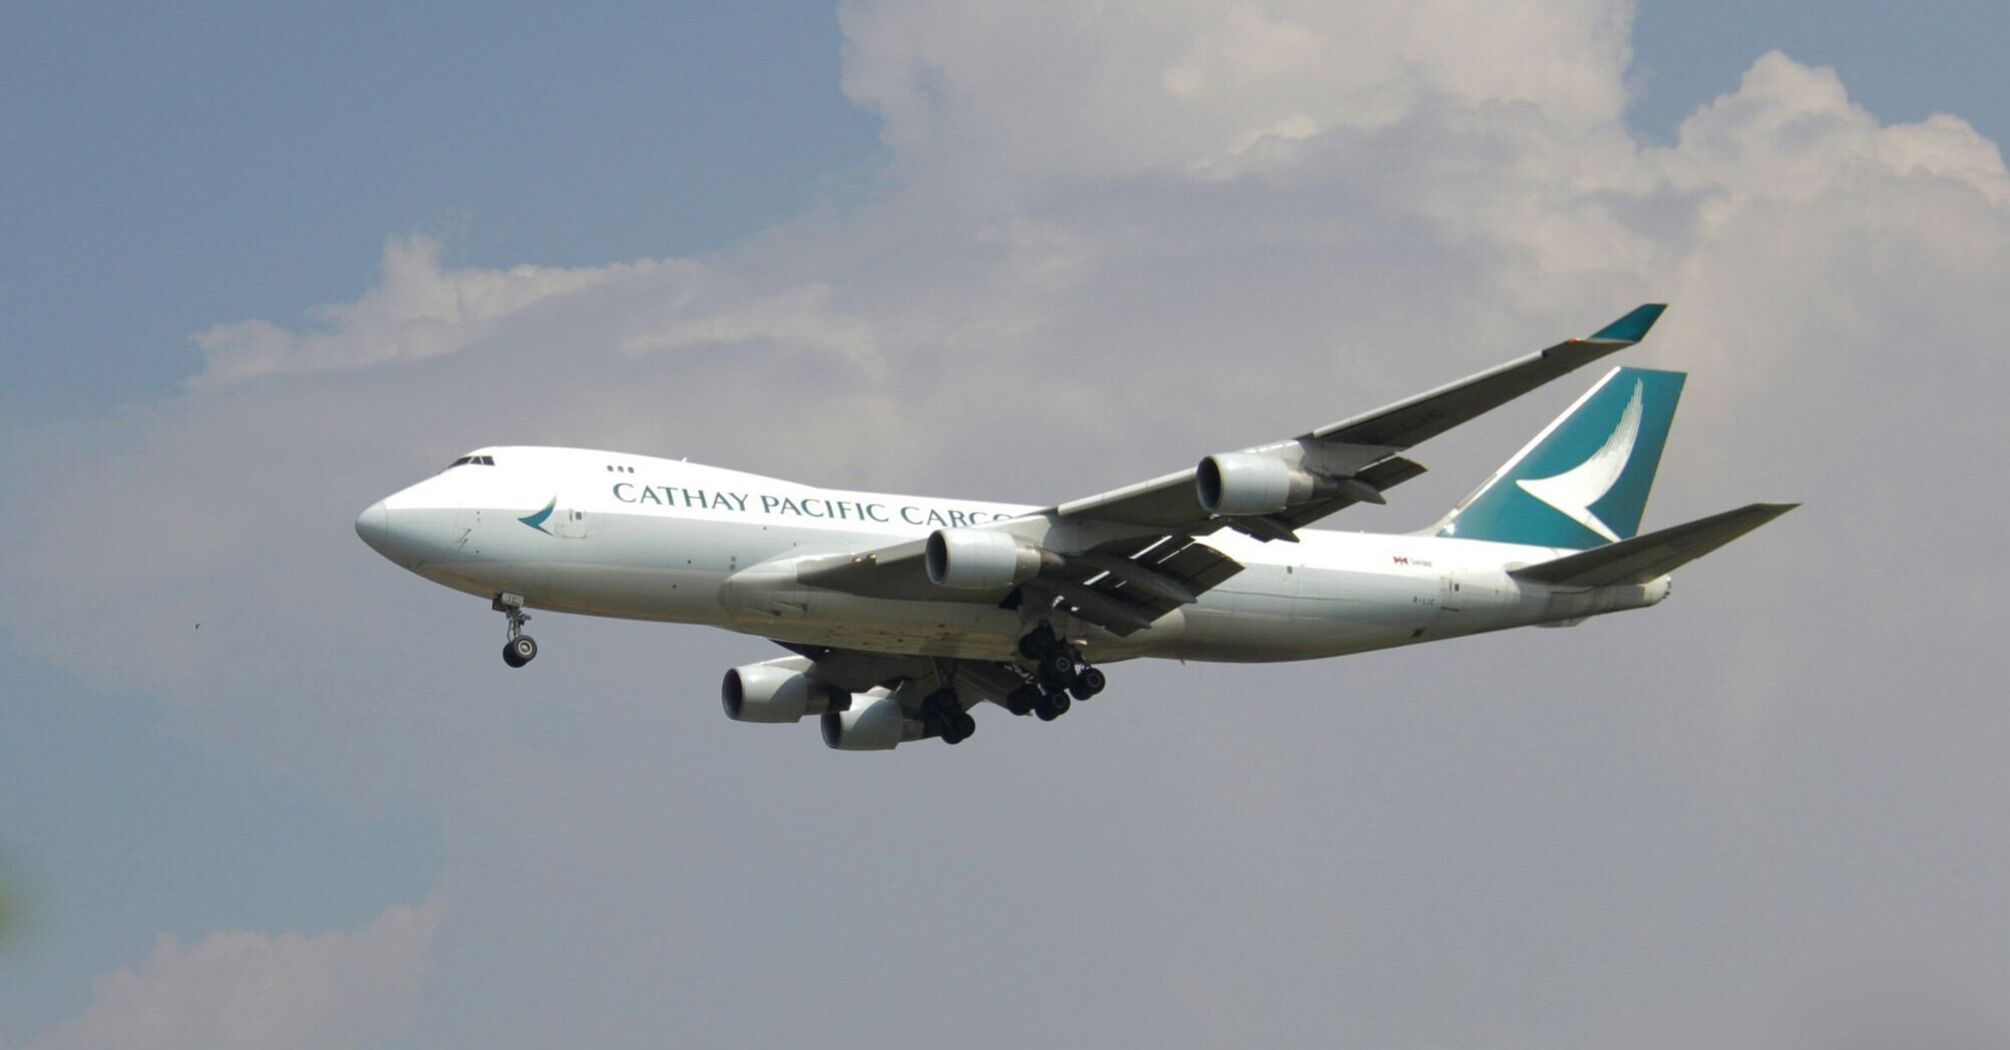 Cathay Pacific cargo airplane in flight against a cloudy sky